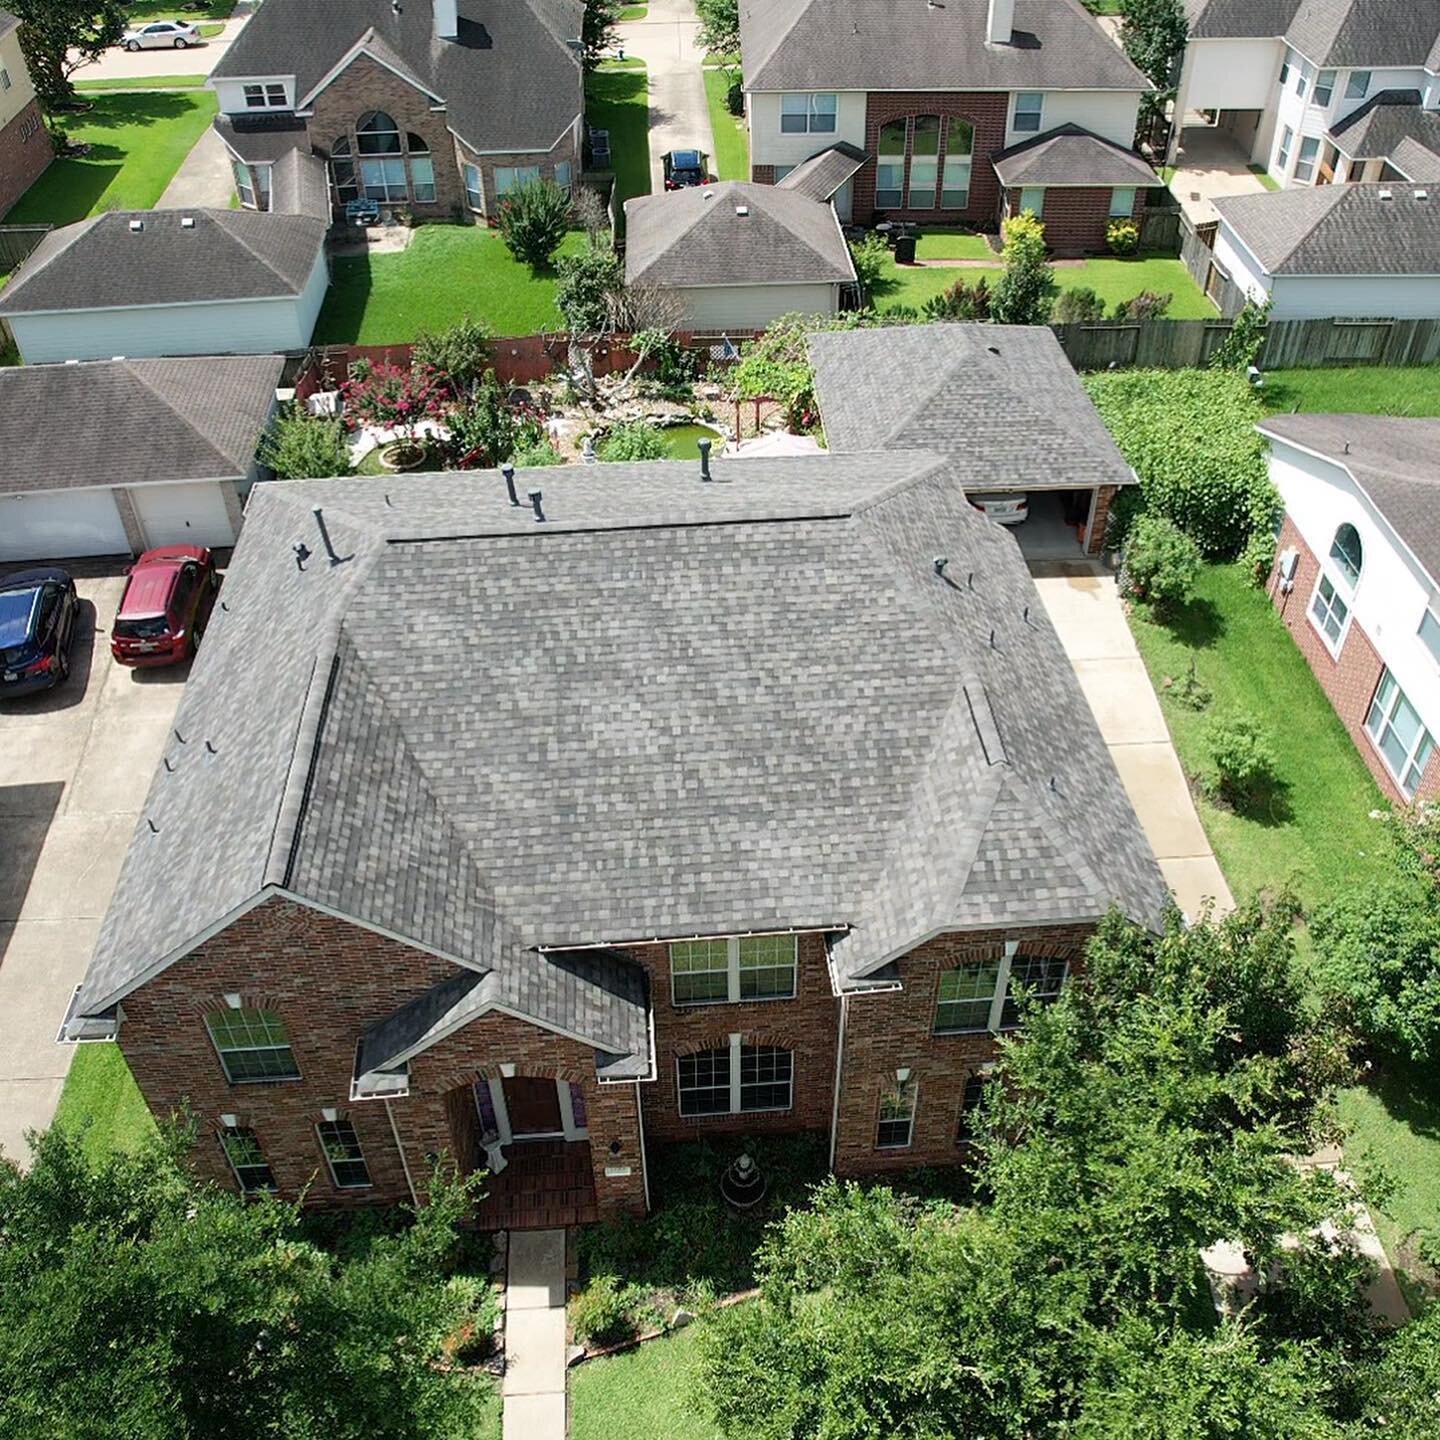 JUST INSTALLED! CertainTeed Roofing System gave this house a fresh new look! #BetterThanBefore&hellip;Talk with one of our insurance specialists to see if your roof qualifies #roofing